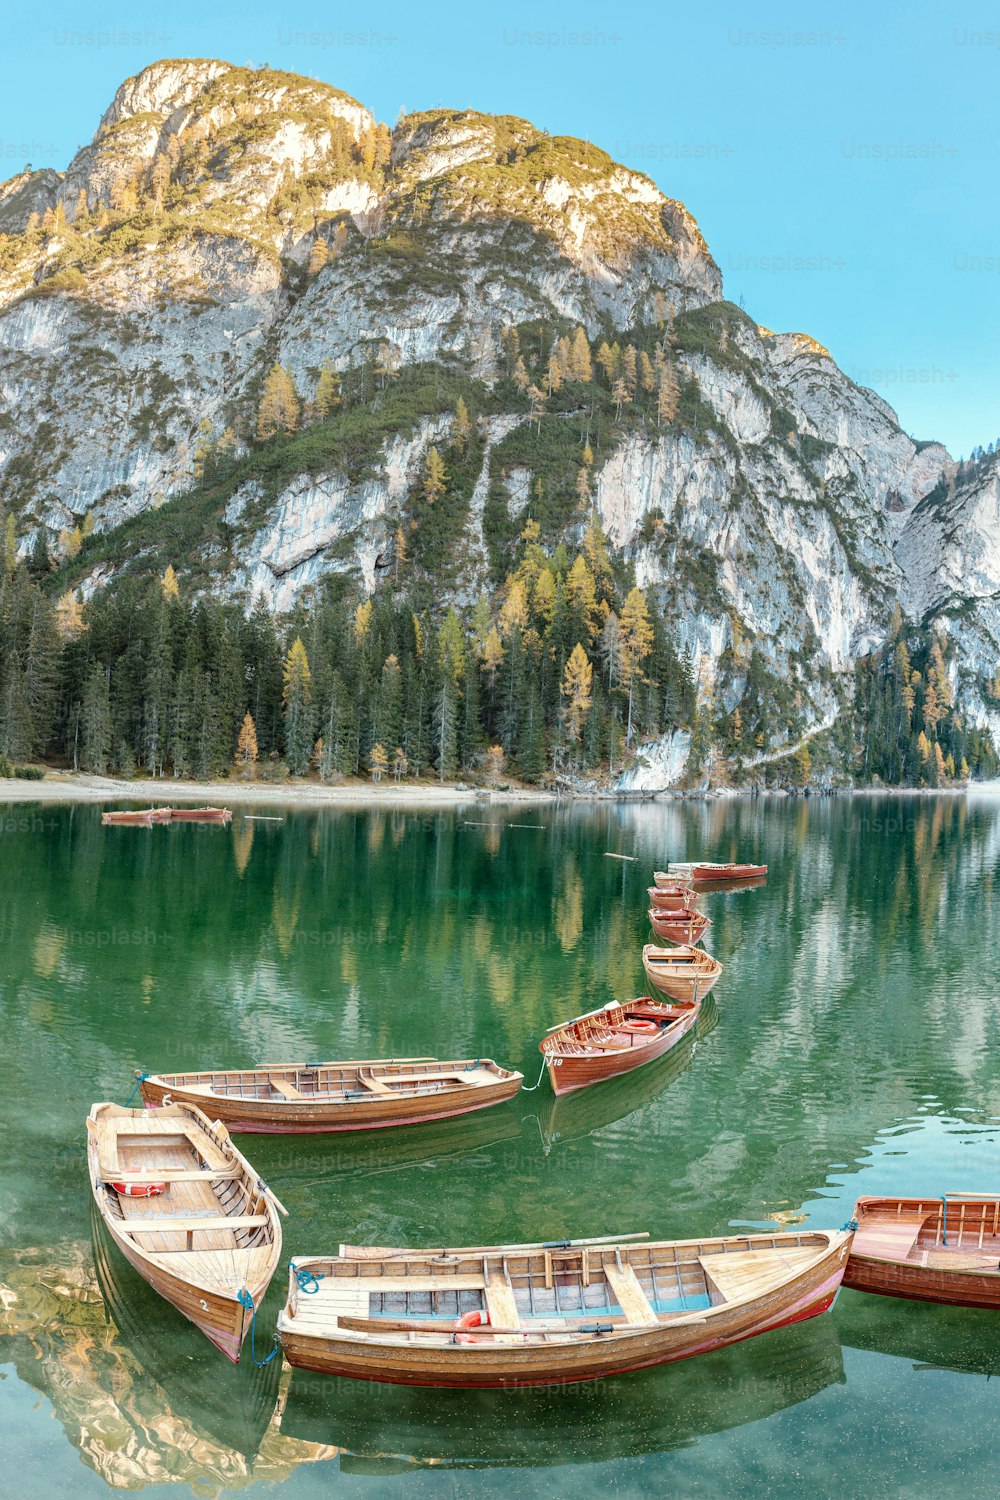 A magical panoramic landscape with calm colors of the famous lake Braies in the Dolomites Alps during autumn season. A popular tourist attraction